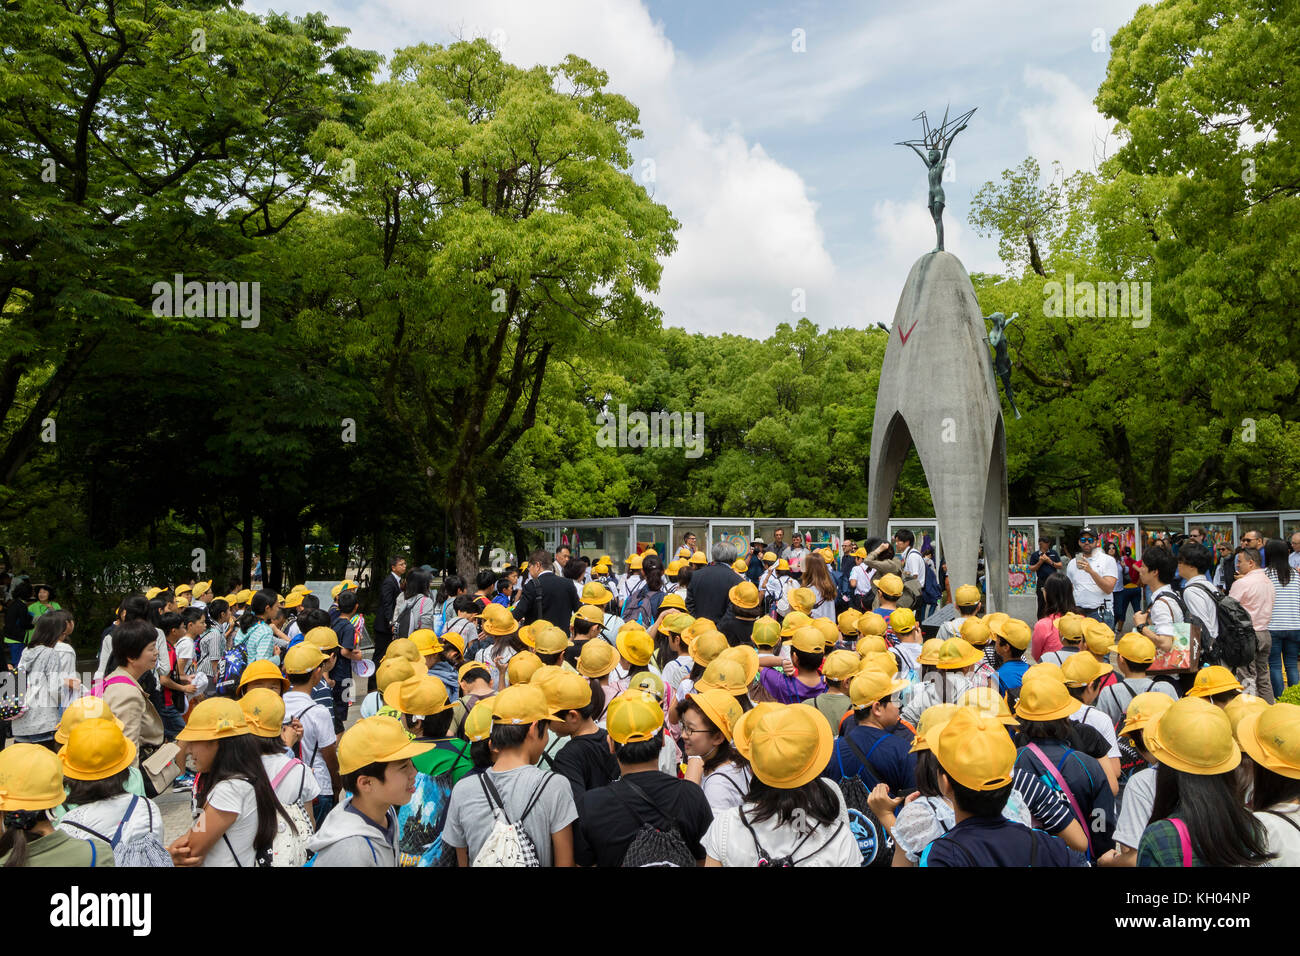 Hiroshima, Japan - May 25, 2017: Students gathering at the Children's Peace Monument in Hiroshima Peace Memorial Park in memory of atomic bombing vict Stock Photo